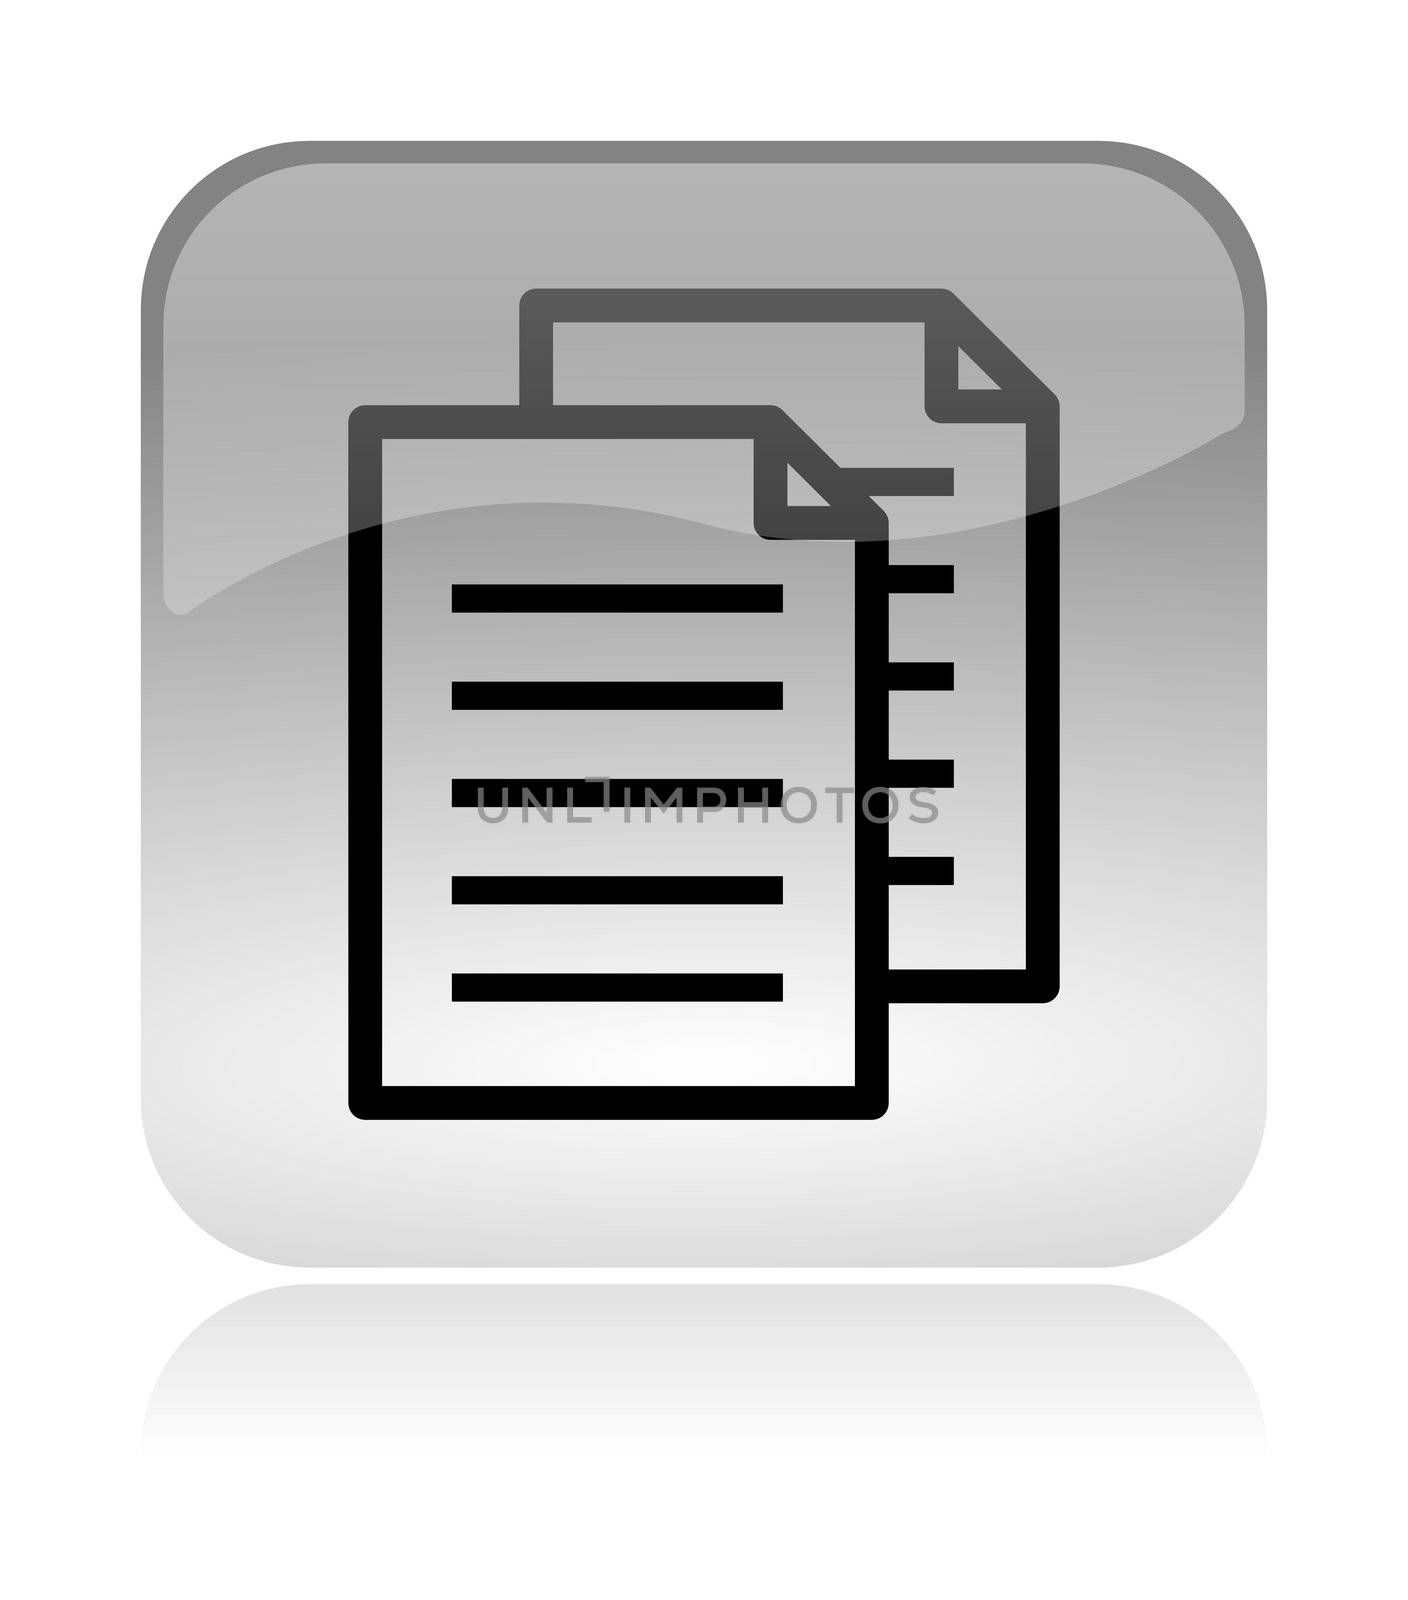 Copy documents white, transparent and glossy web interface icon with reflection